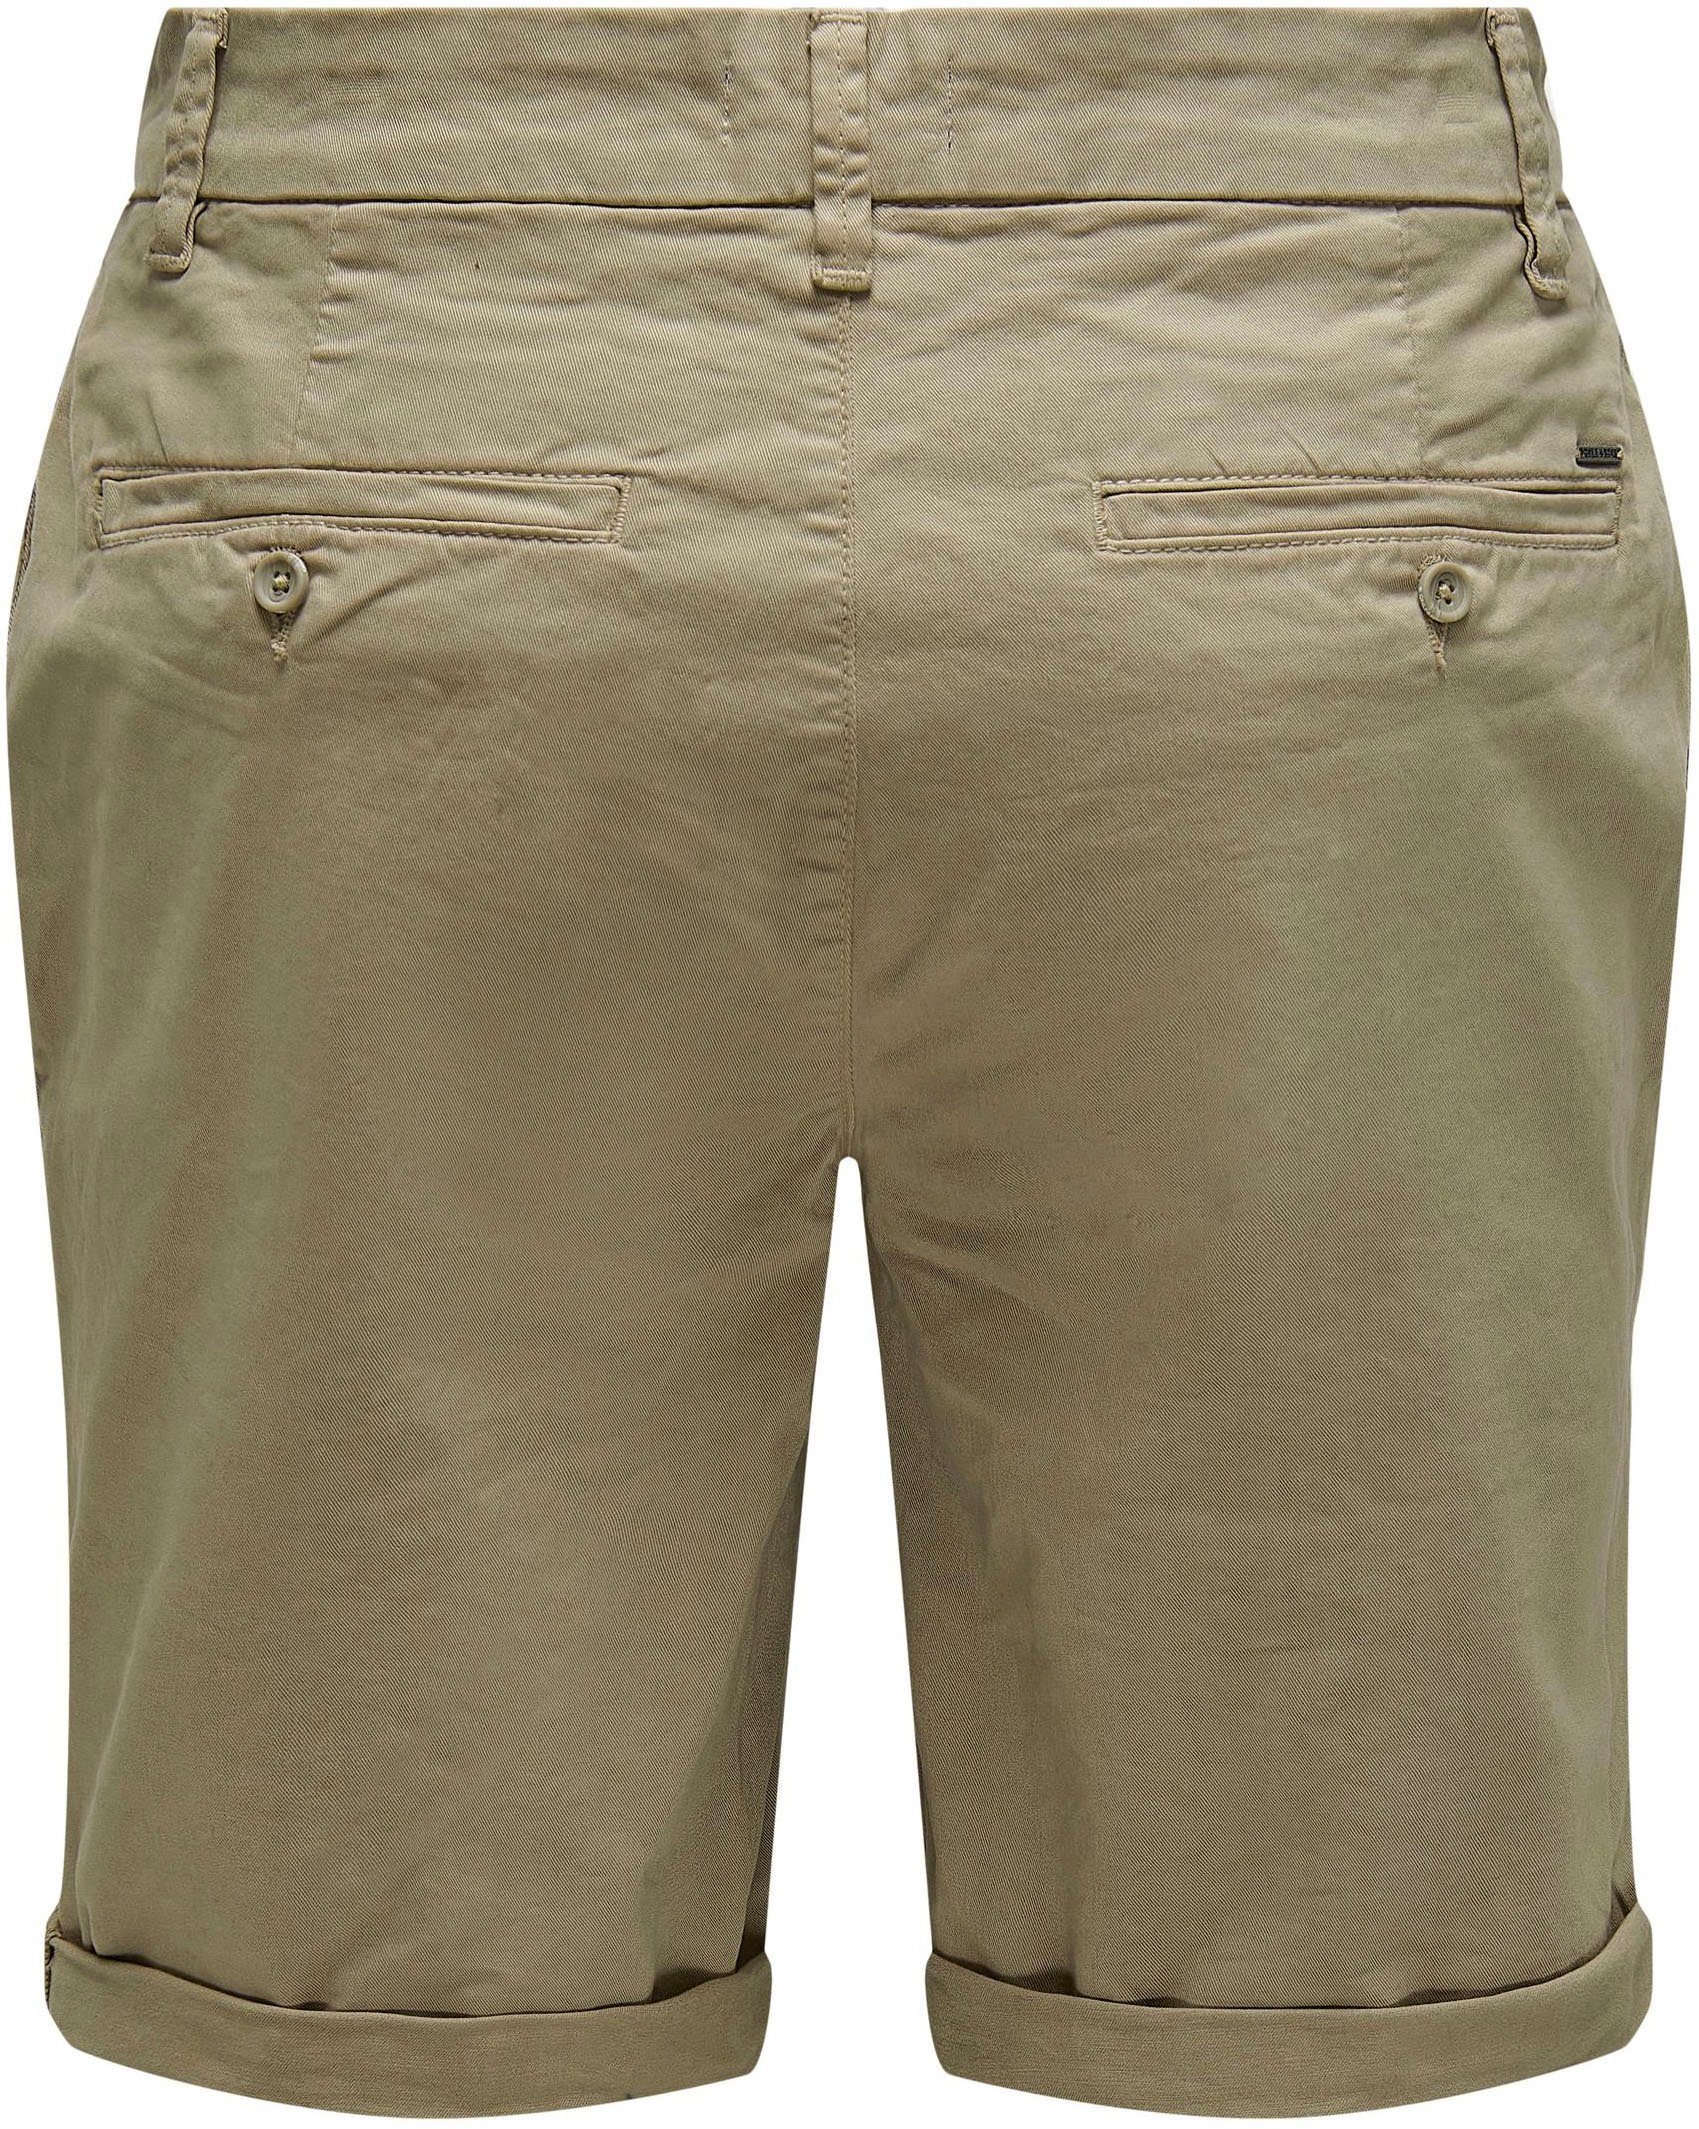 TWILL 4481 & SONS Chinchilla NOOS REG ONSPETER ONLY Jeansshorts SHORTS